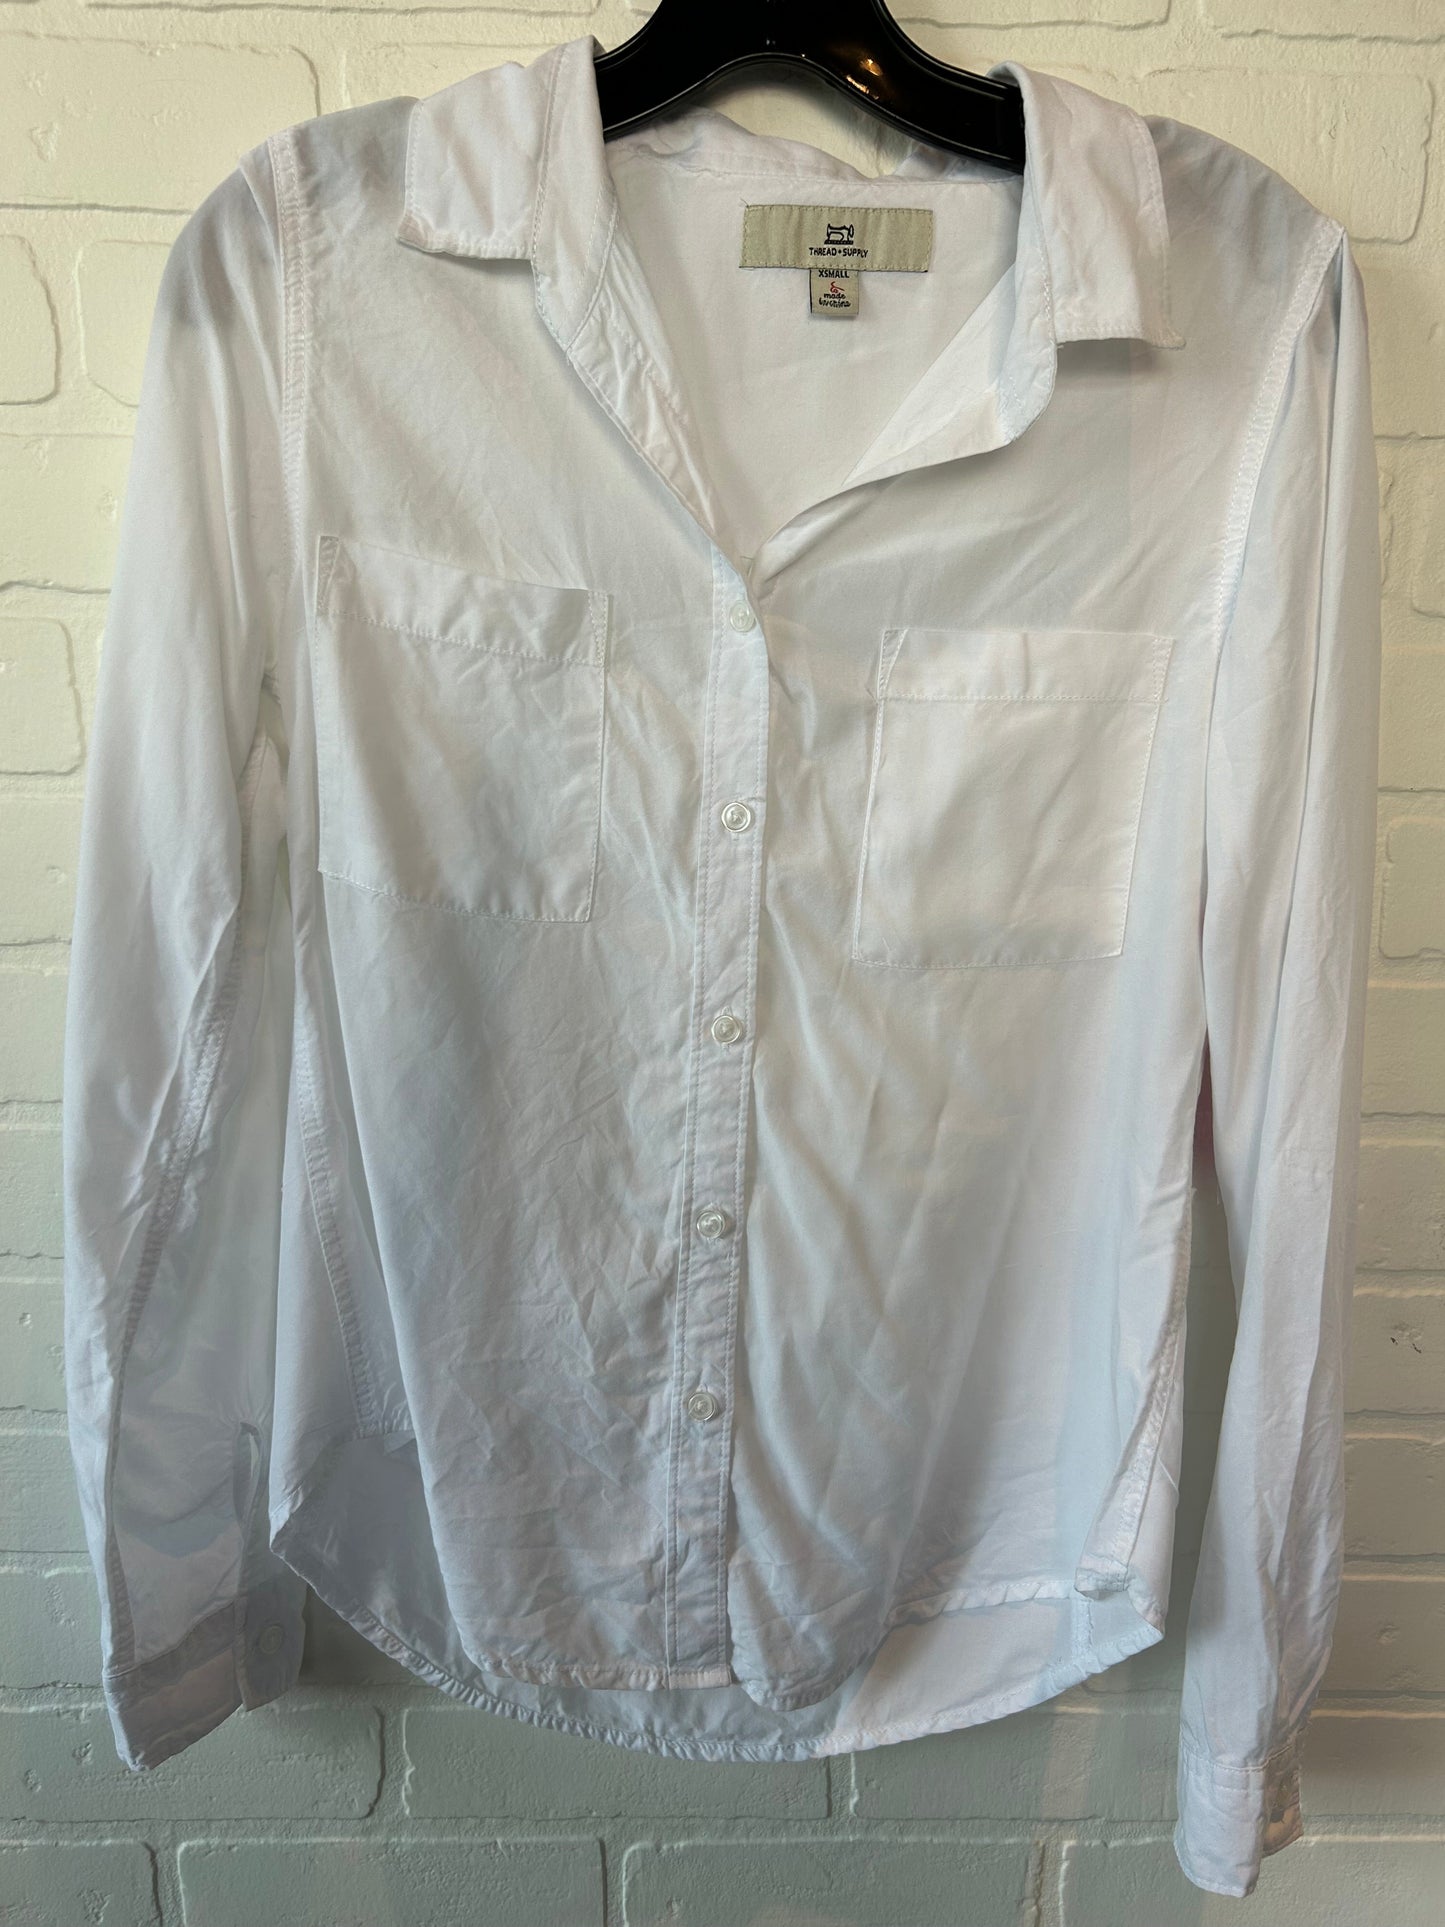 White Blouse Long Sleeve Thread And Supply, Size Xs